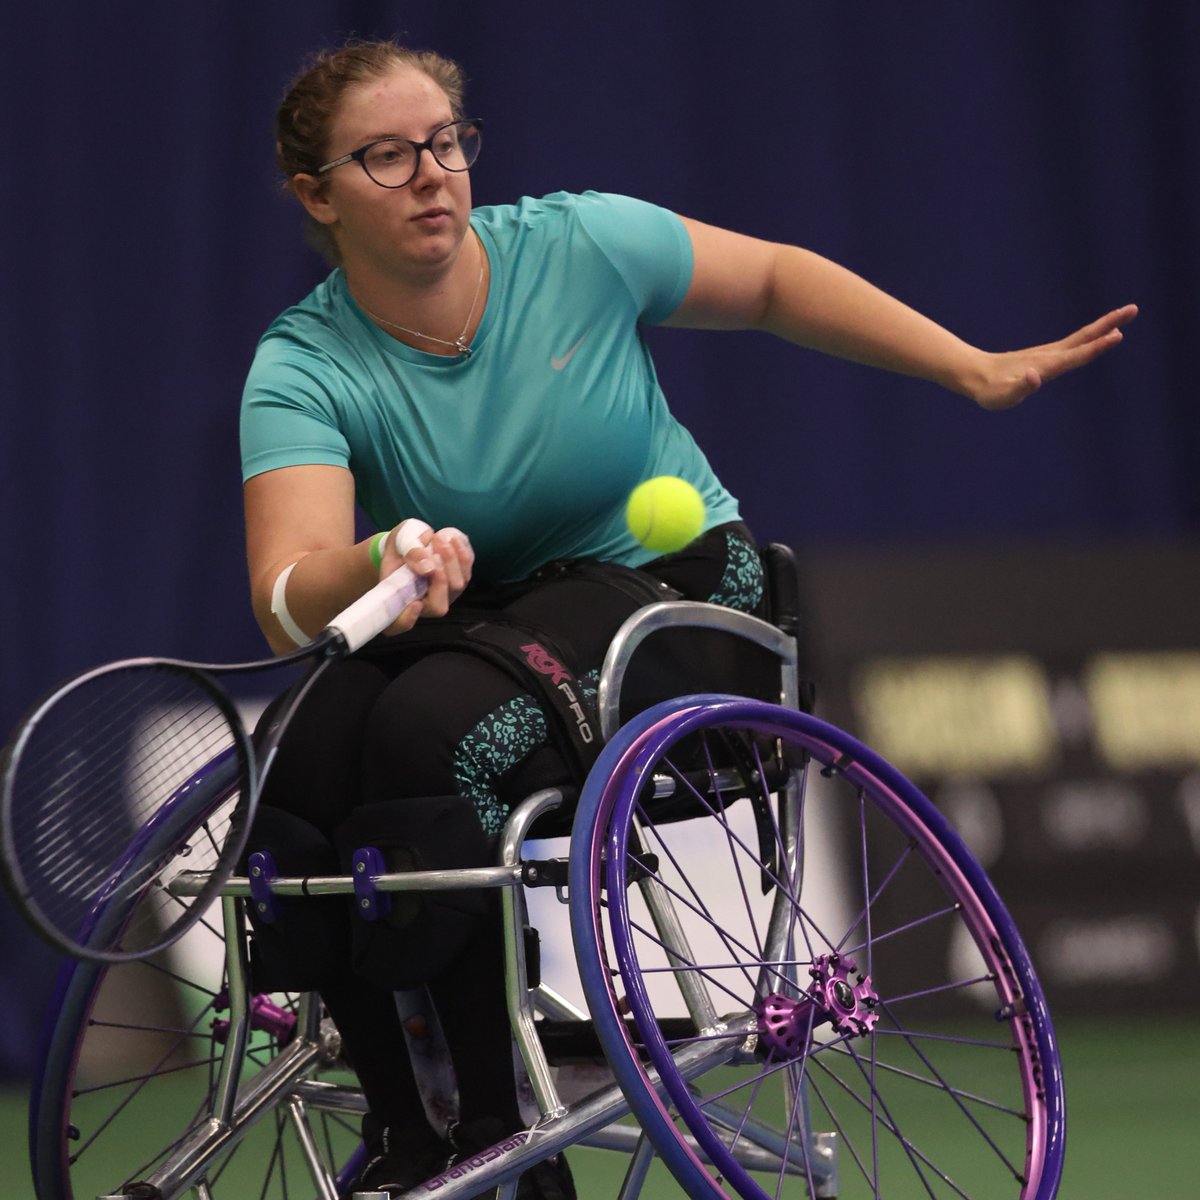 Battling into the quarter-finals...

@lucy_shuker beat Jinte Bos (NED) 5-7, 7-5, 6-1 in her opening match at the Kemal Sahin Cup 🇬🇧 and partnered @AbbieBreakwell to a 6-2, 6-1 first round win in women's doubles before today's quarter-finals

#BackTheBrits 🇬🇧 | #wheelchairtennis